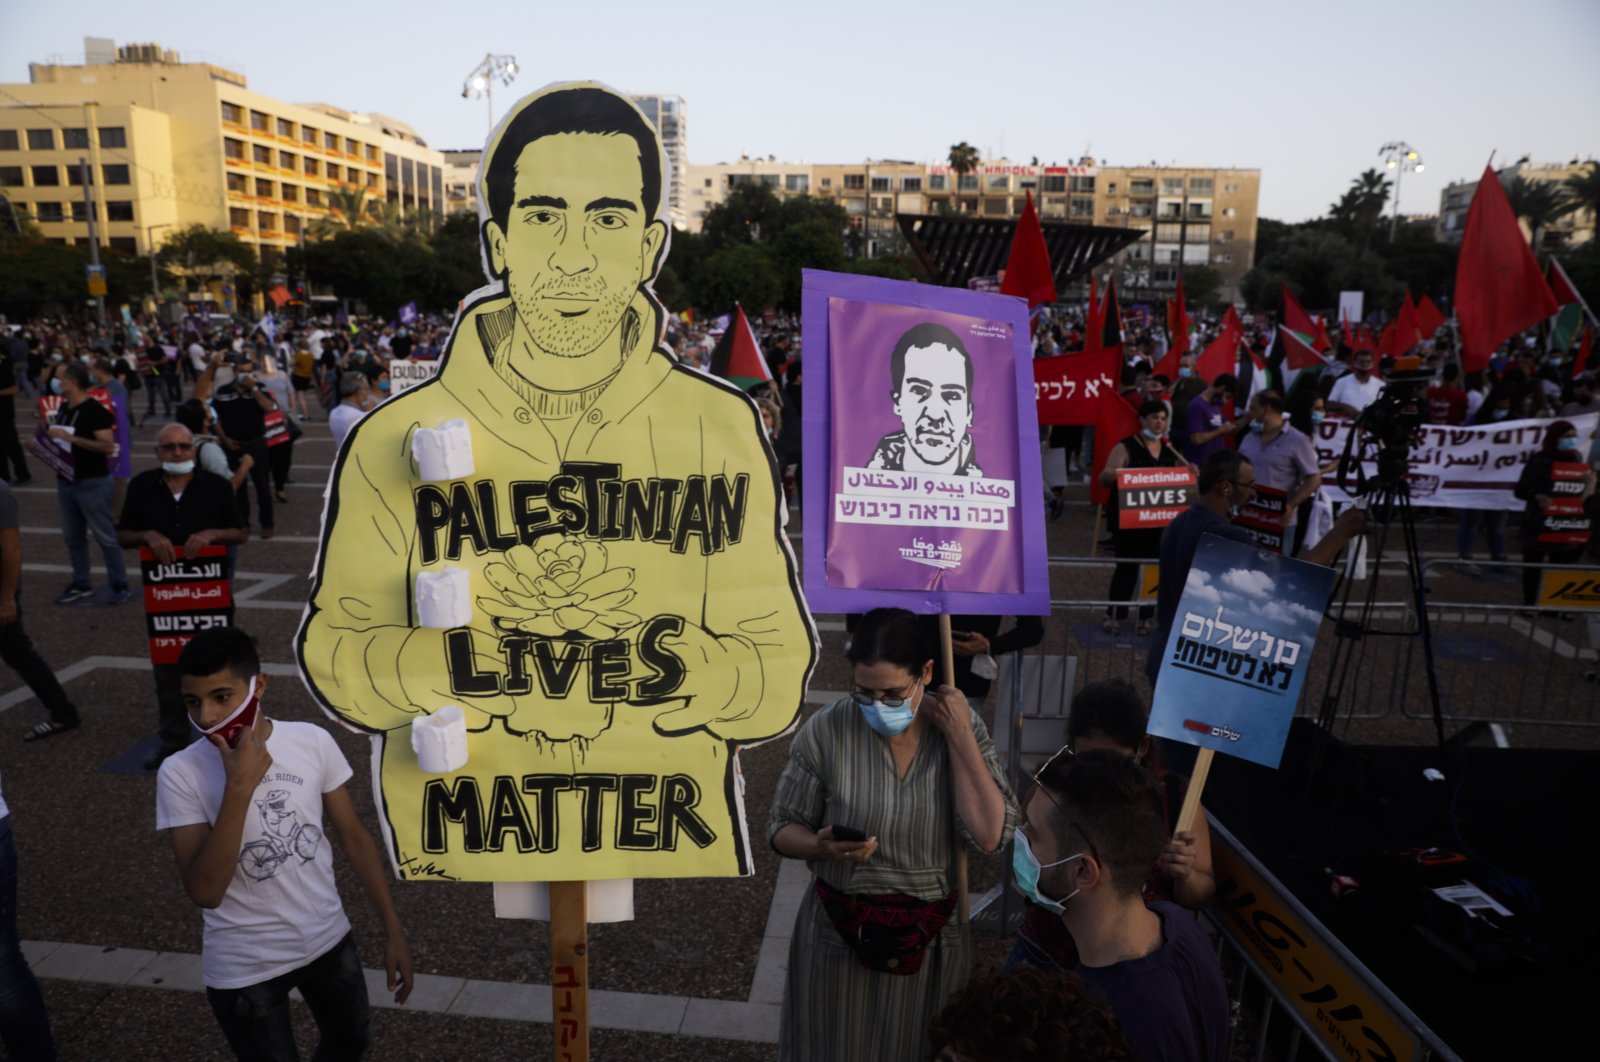 Protesters attend a rally against Israel plans to annex parts of the West Bank, in Tel Aviv, Israel, Saturday, June 6, 2020. (AP Photo)